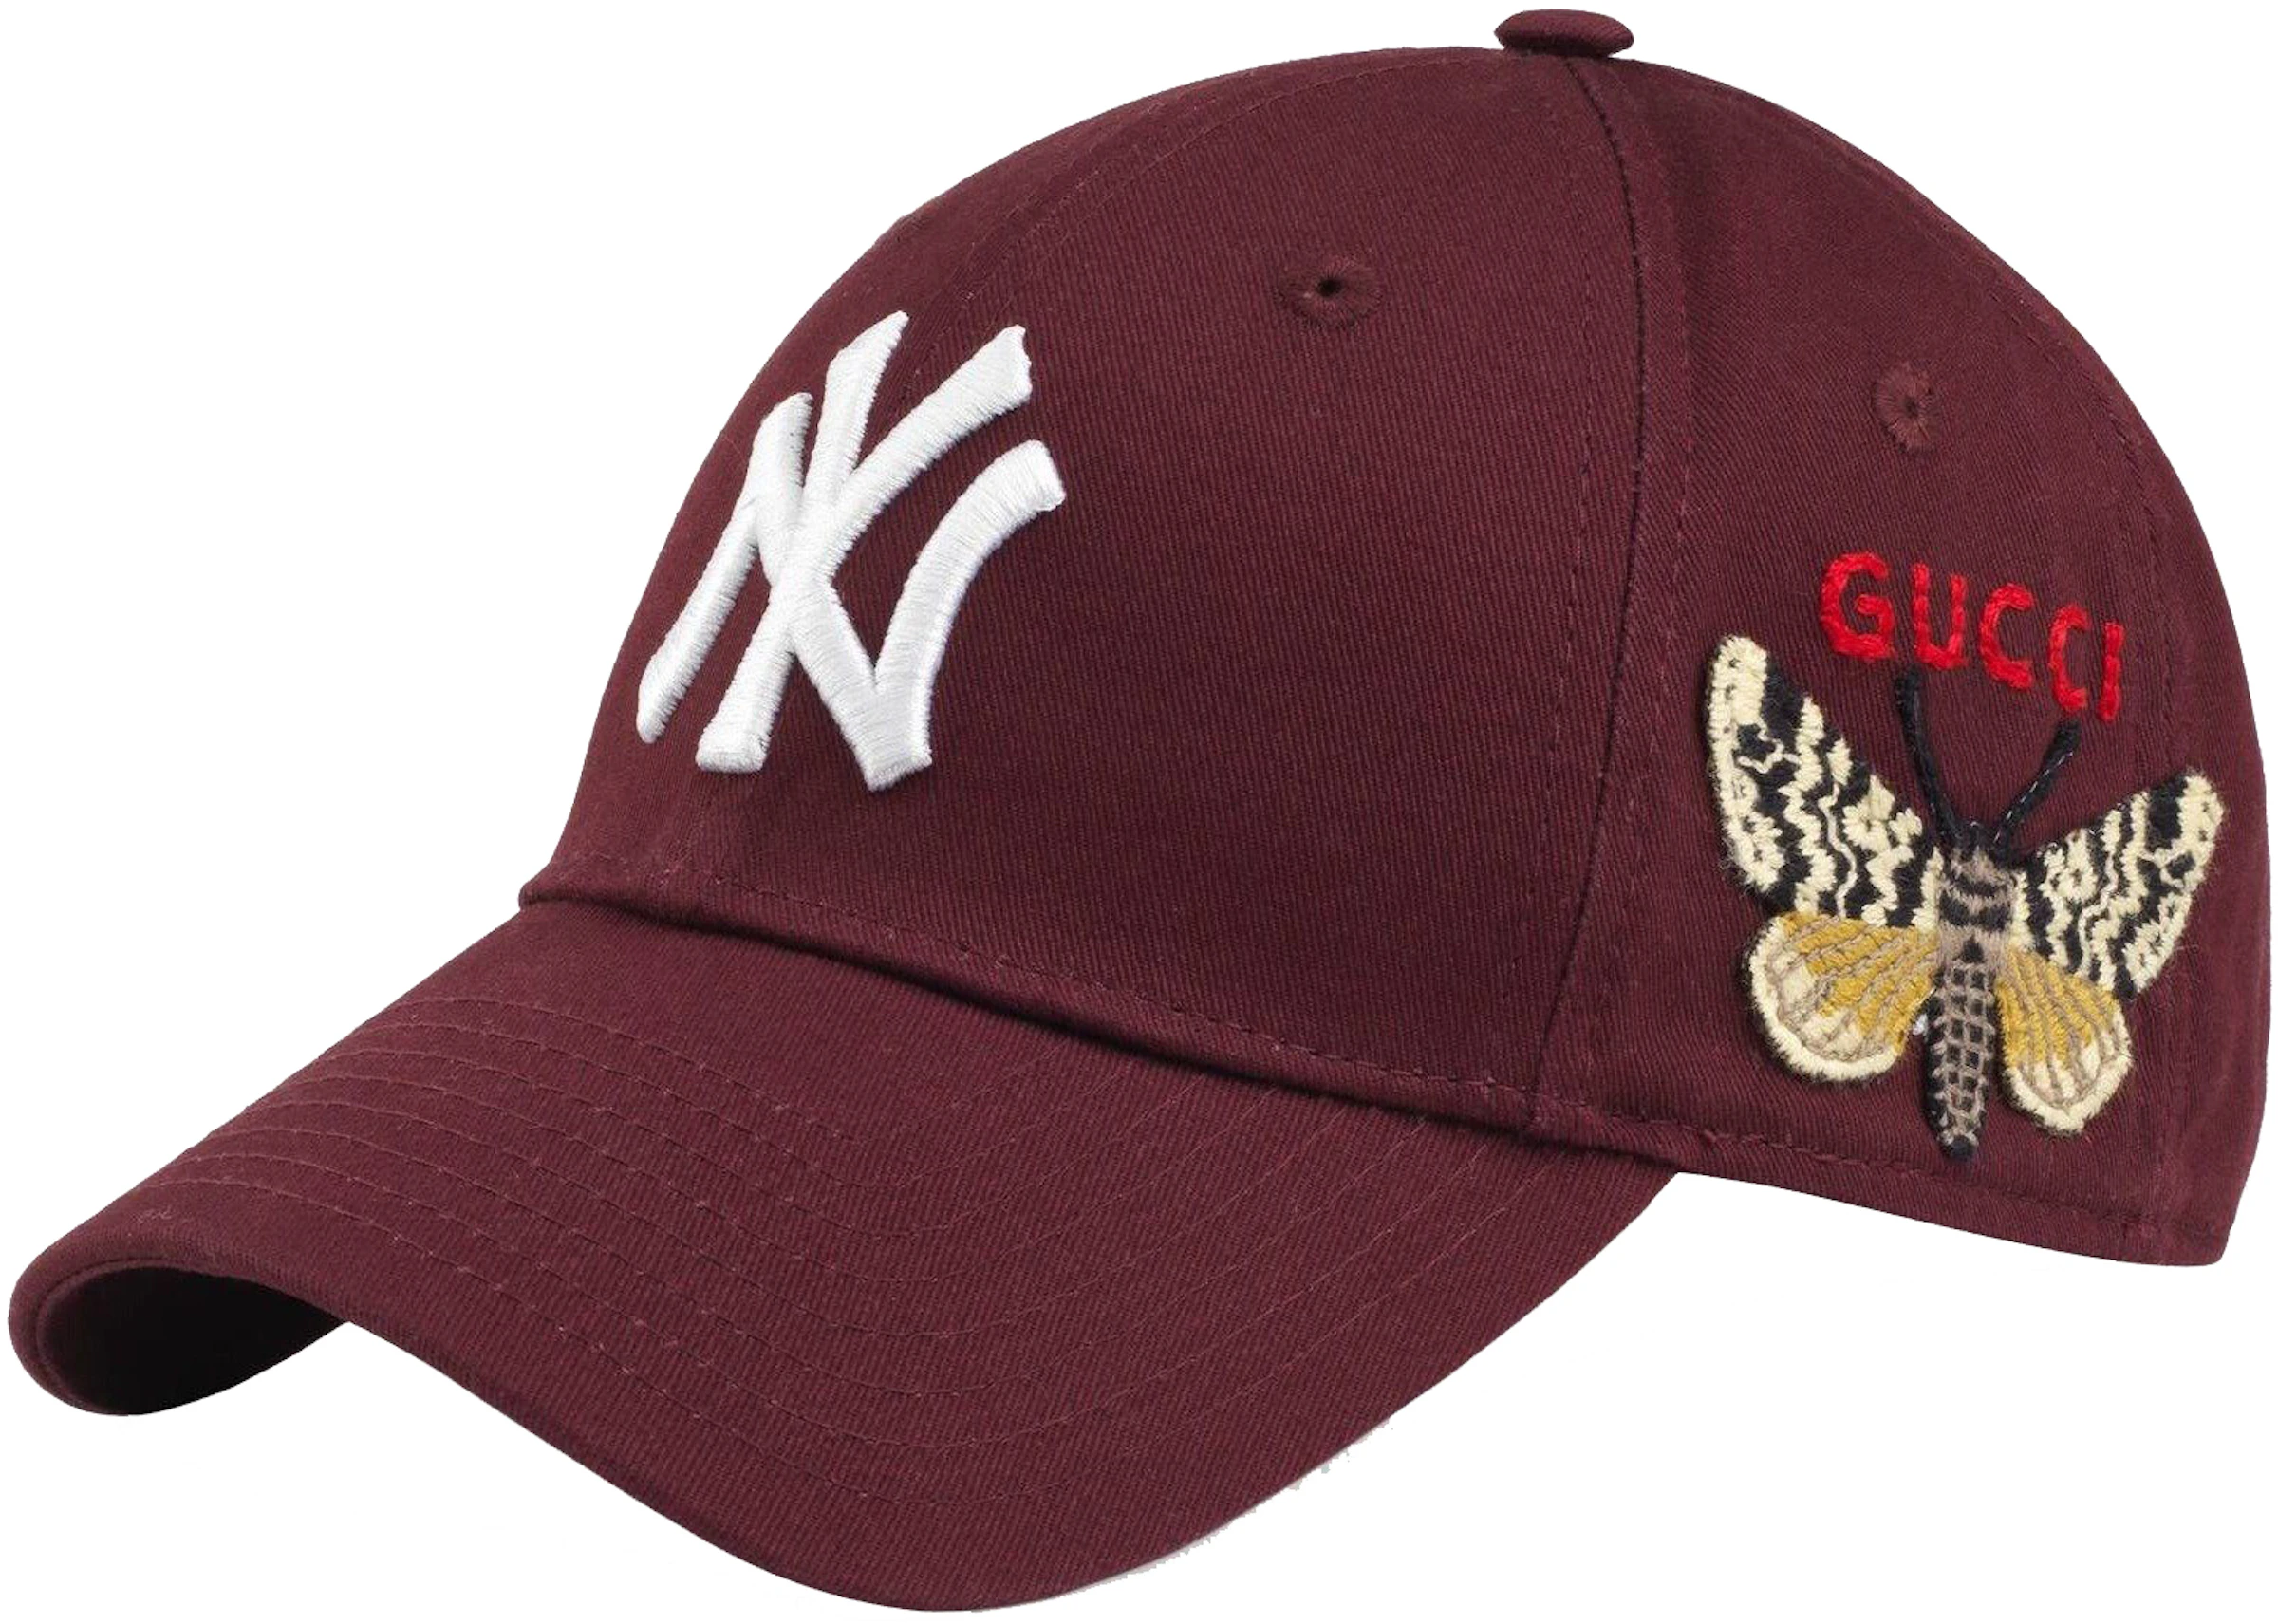 Gucci NY Yankees Embroidered Butterfly Baseball Cap Burgundy - SS20 -